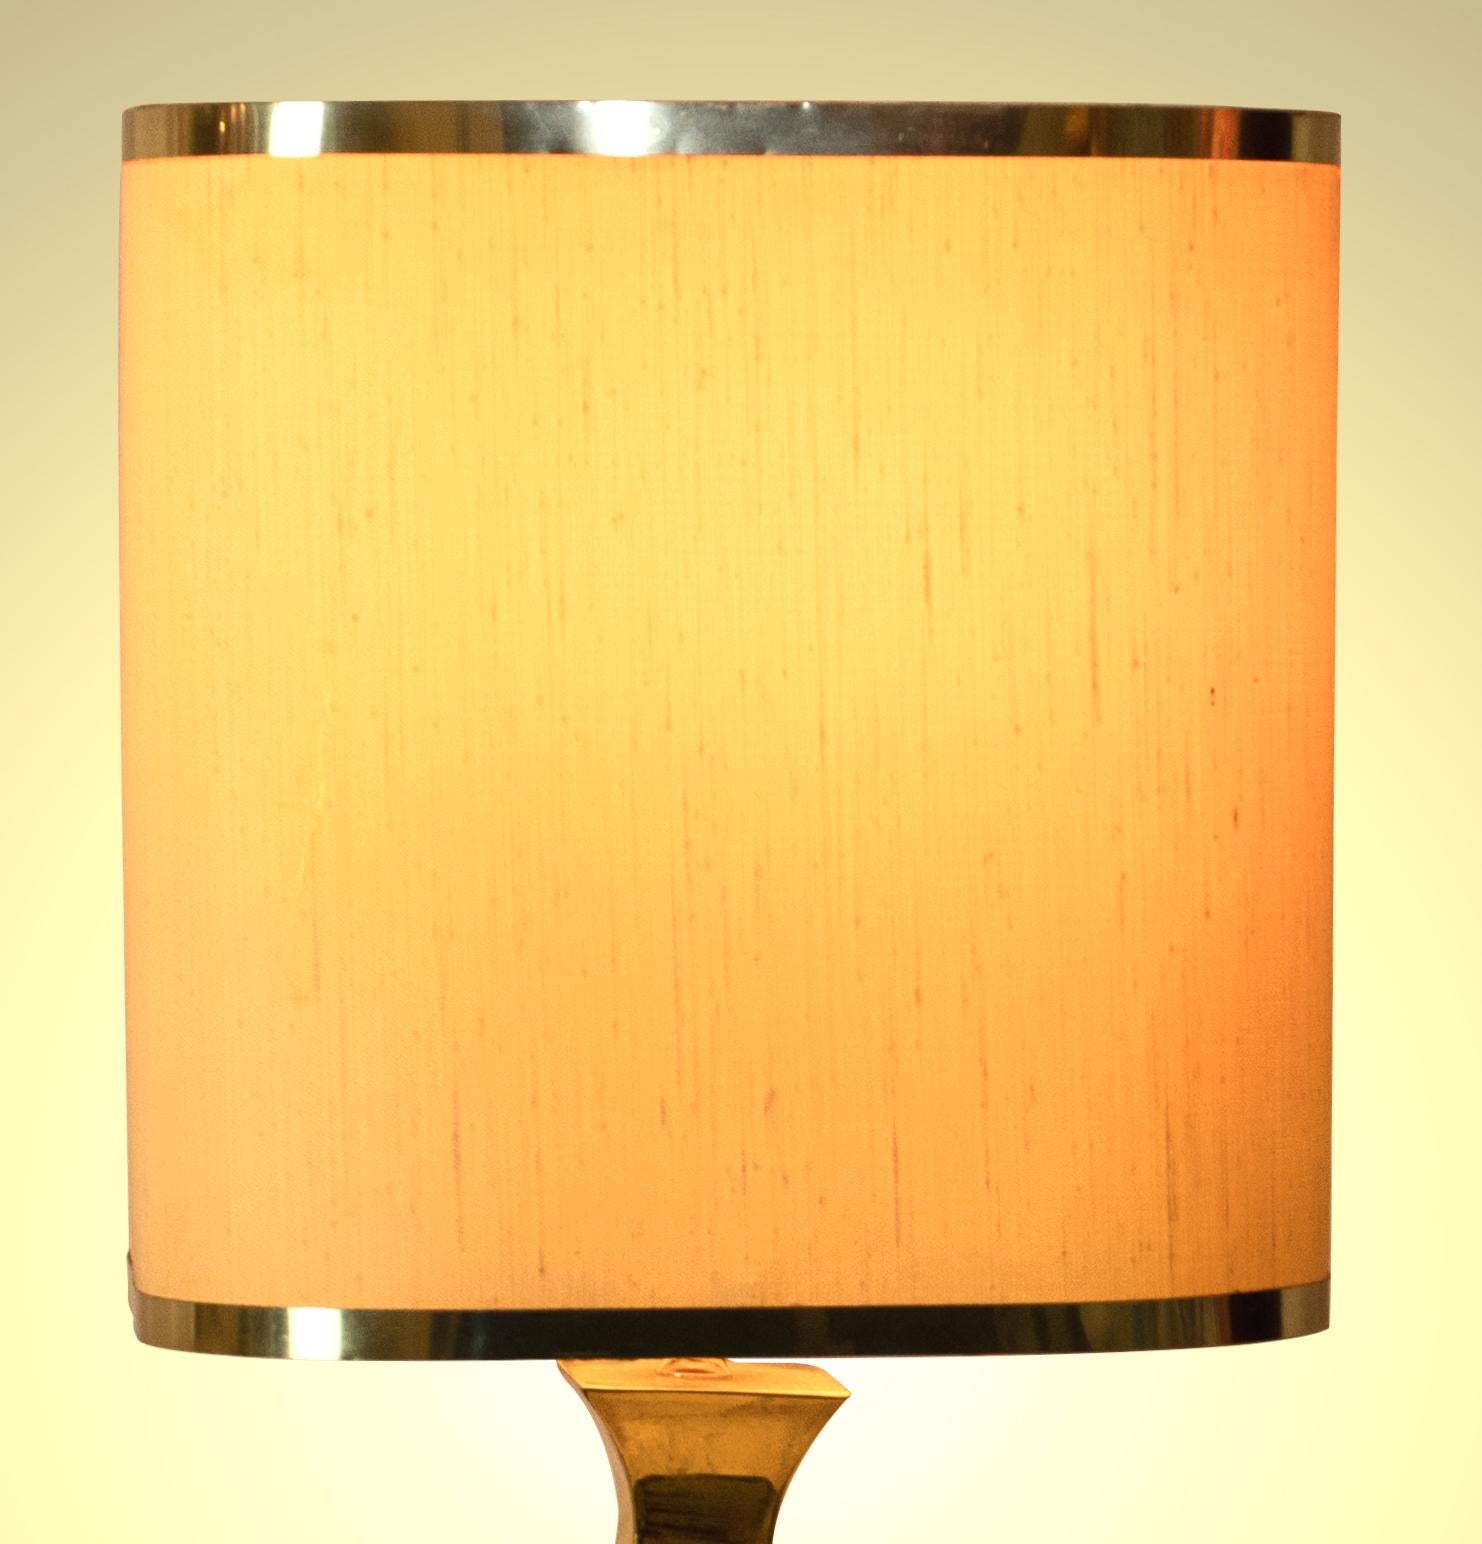 Brass table lamp is an original design lamp realized by the designers A. Tonello and A. Montagna Grillo, circa 1970s.

Iconic table lamp made of brass.

Dimensions: cm 81 (height) x 45 (diameter)

Very good conditions.